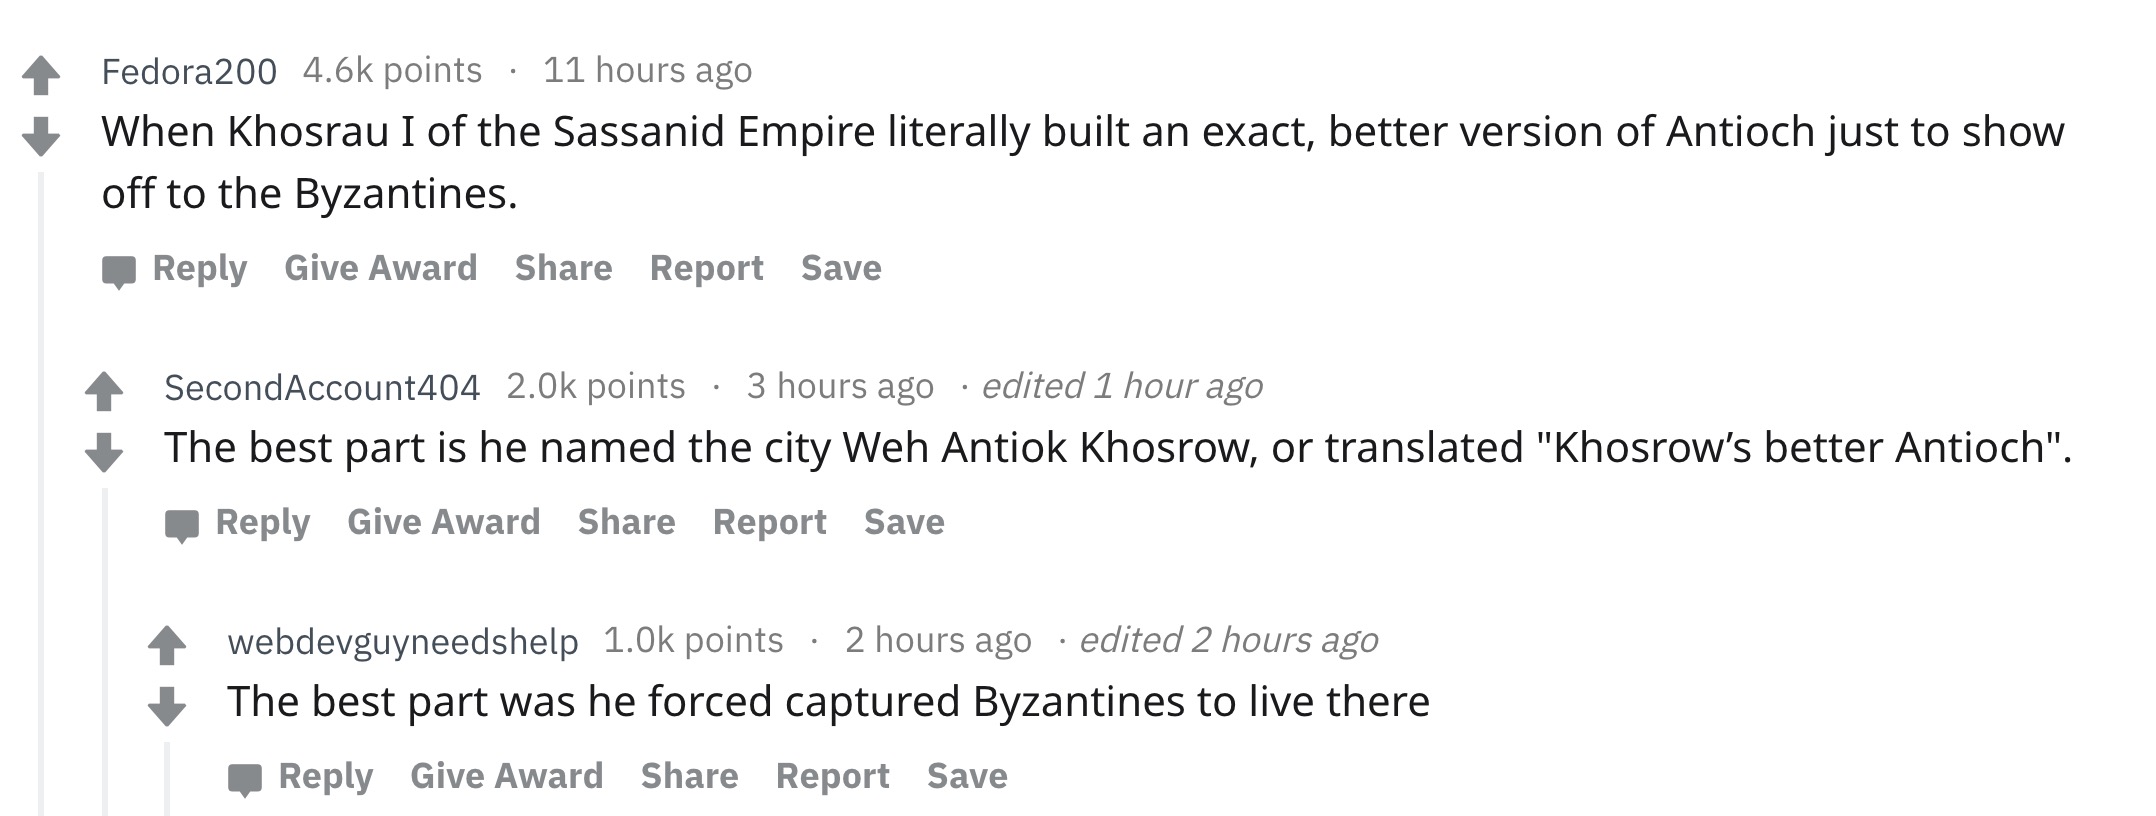 angle - Fedora points 11 hours ago When Khosrau I of the Sassanid Empire literally built an exact, better version of Antioch just to show off to the Byzantines. Give Award Report Save SecondAccount404 points 3 hours ago edited 1 hour ago The best part is